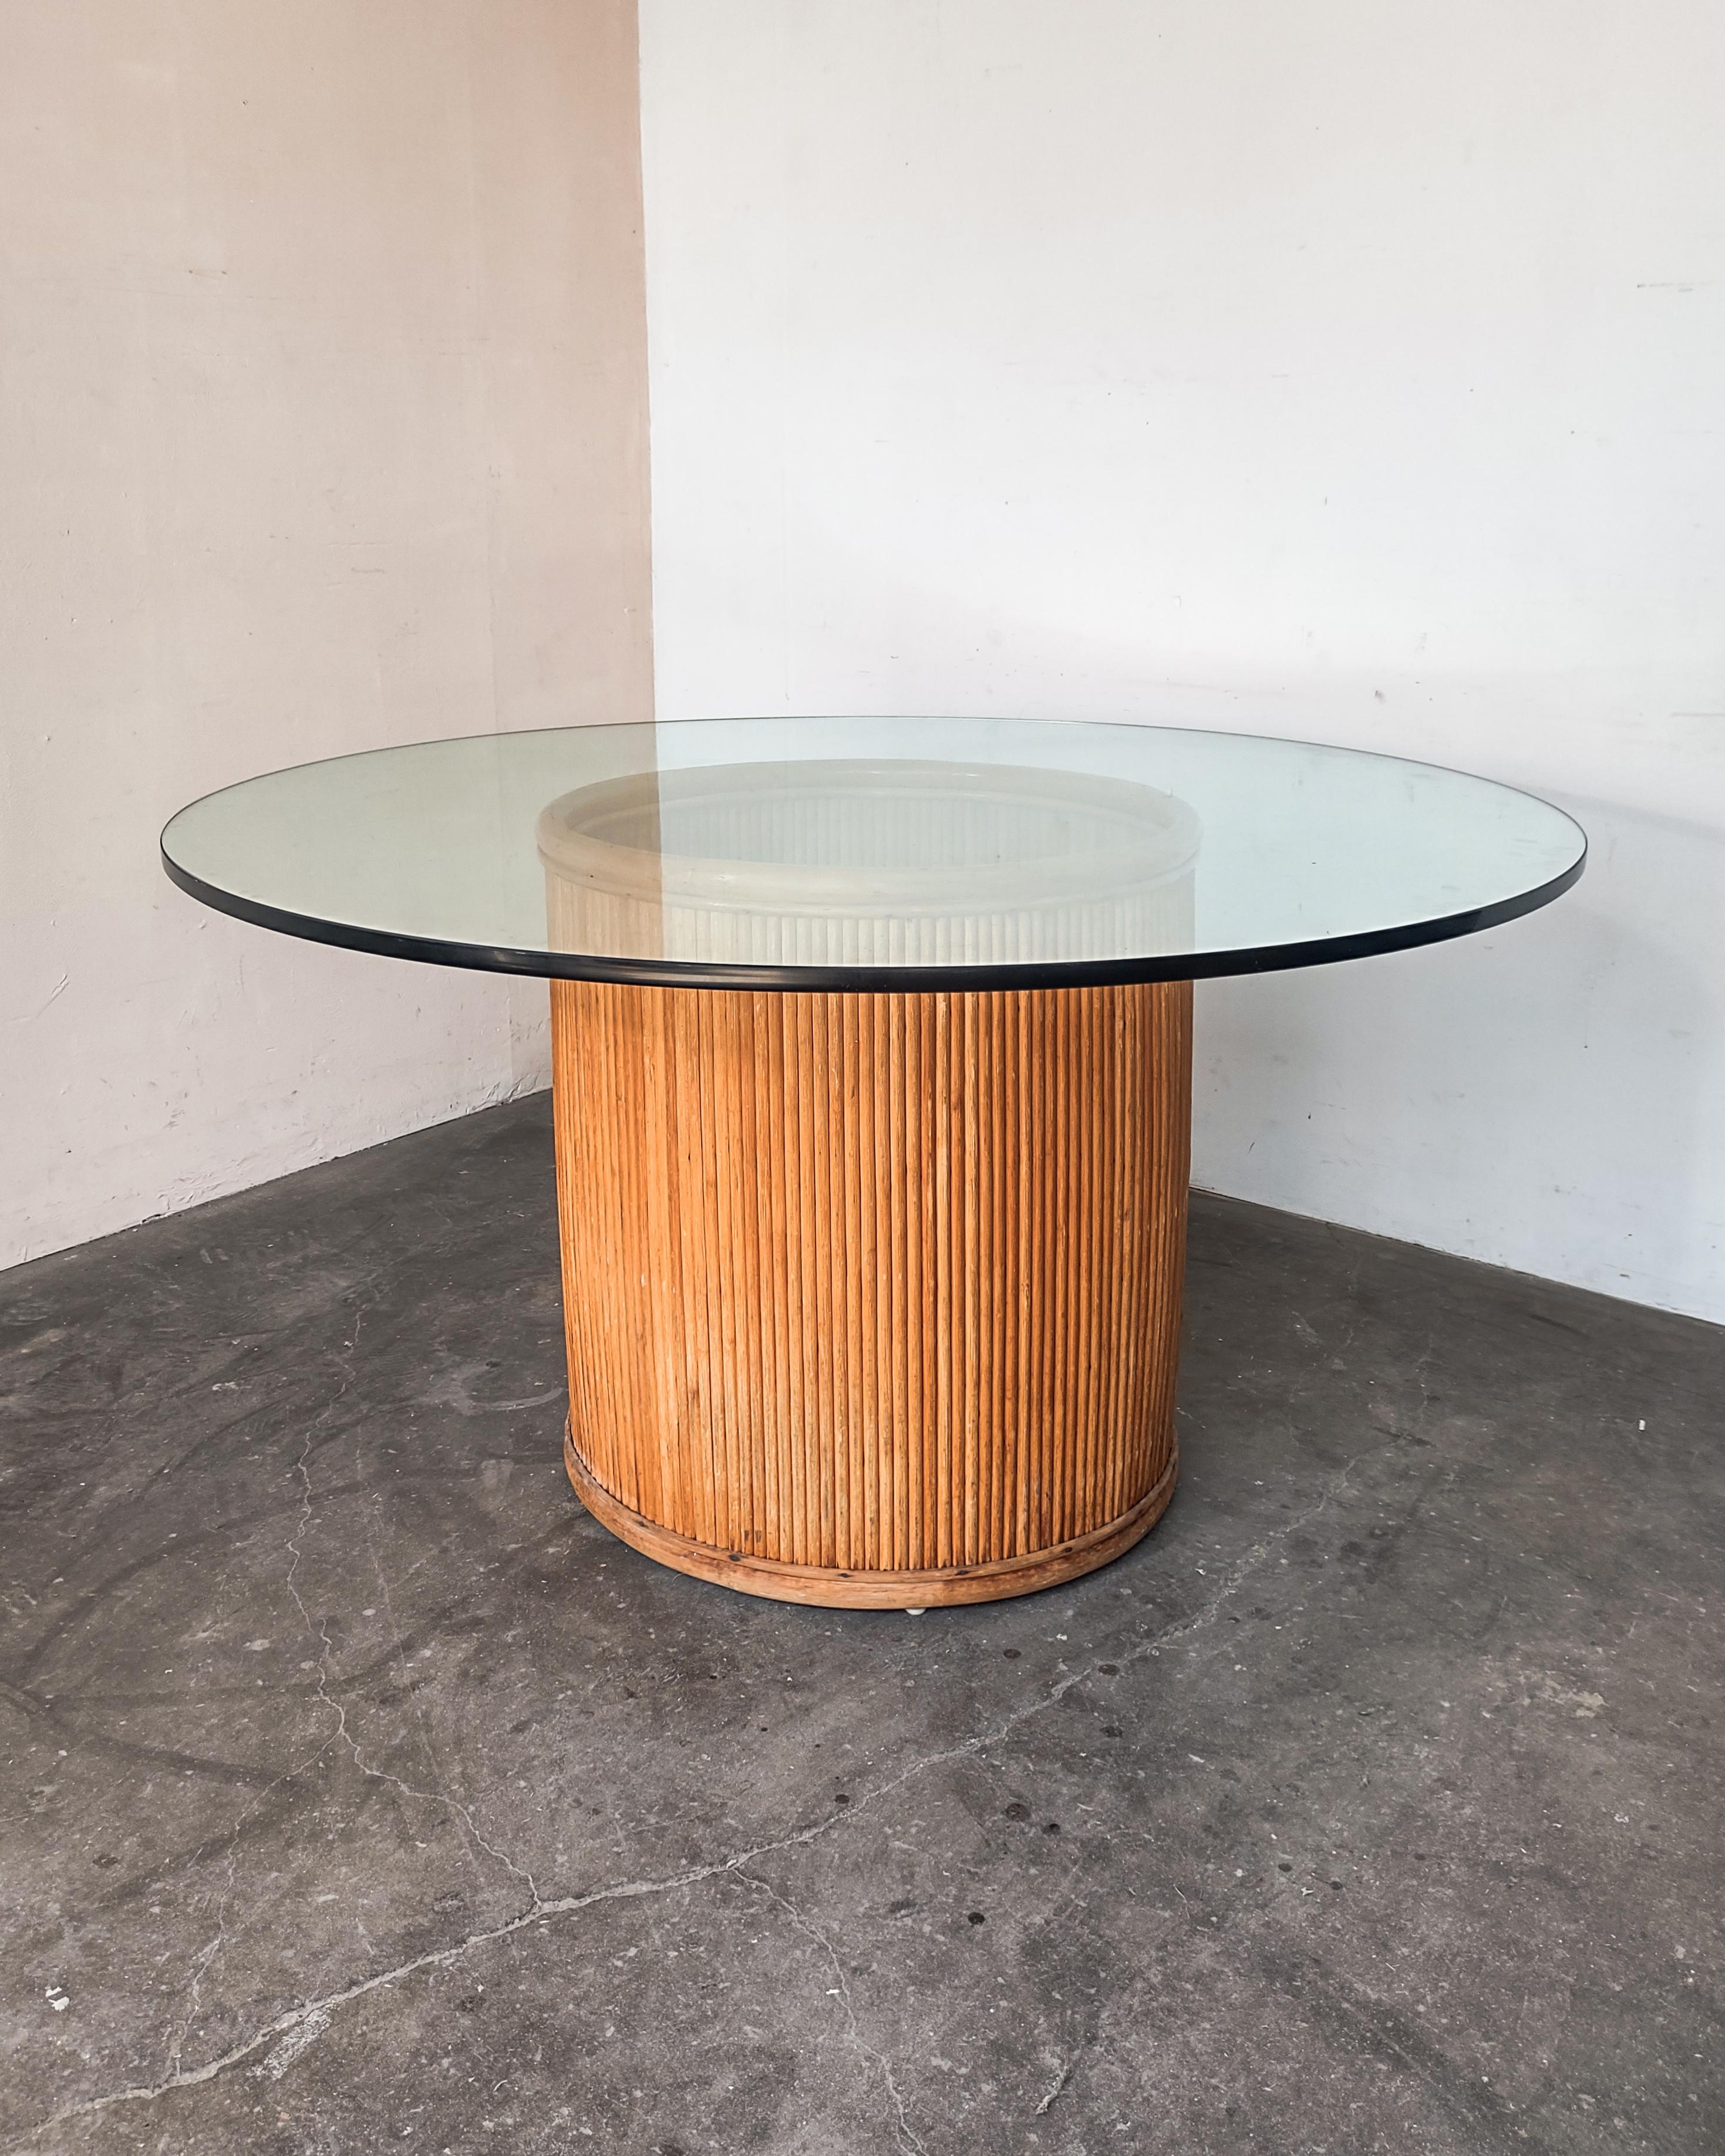 Split pencil reed dining table with glass top features a round split-reed rattan pedestal base and a thick glass table top. Overall great condition with some wear consistent with age.

Measures: 53-5/8